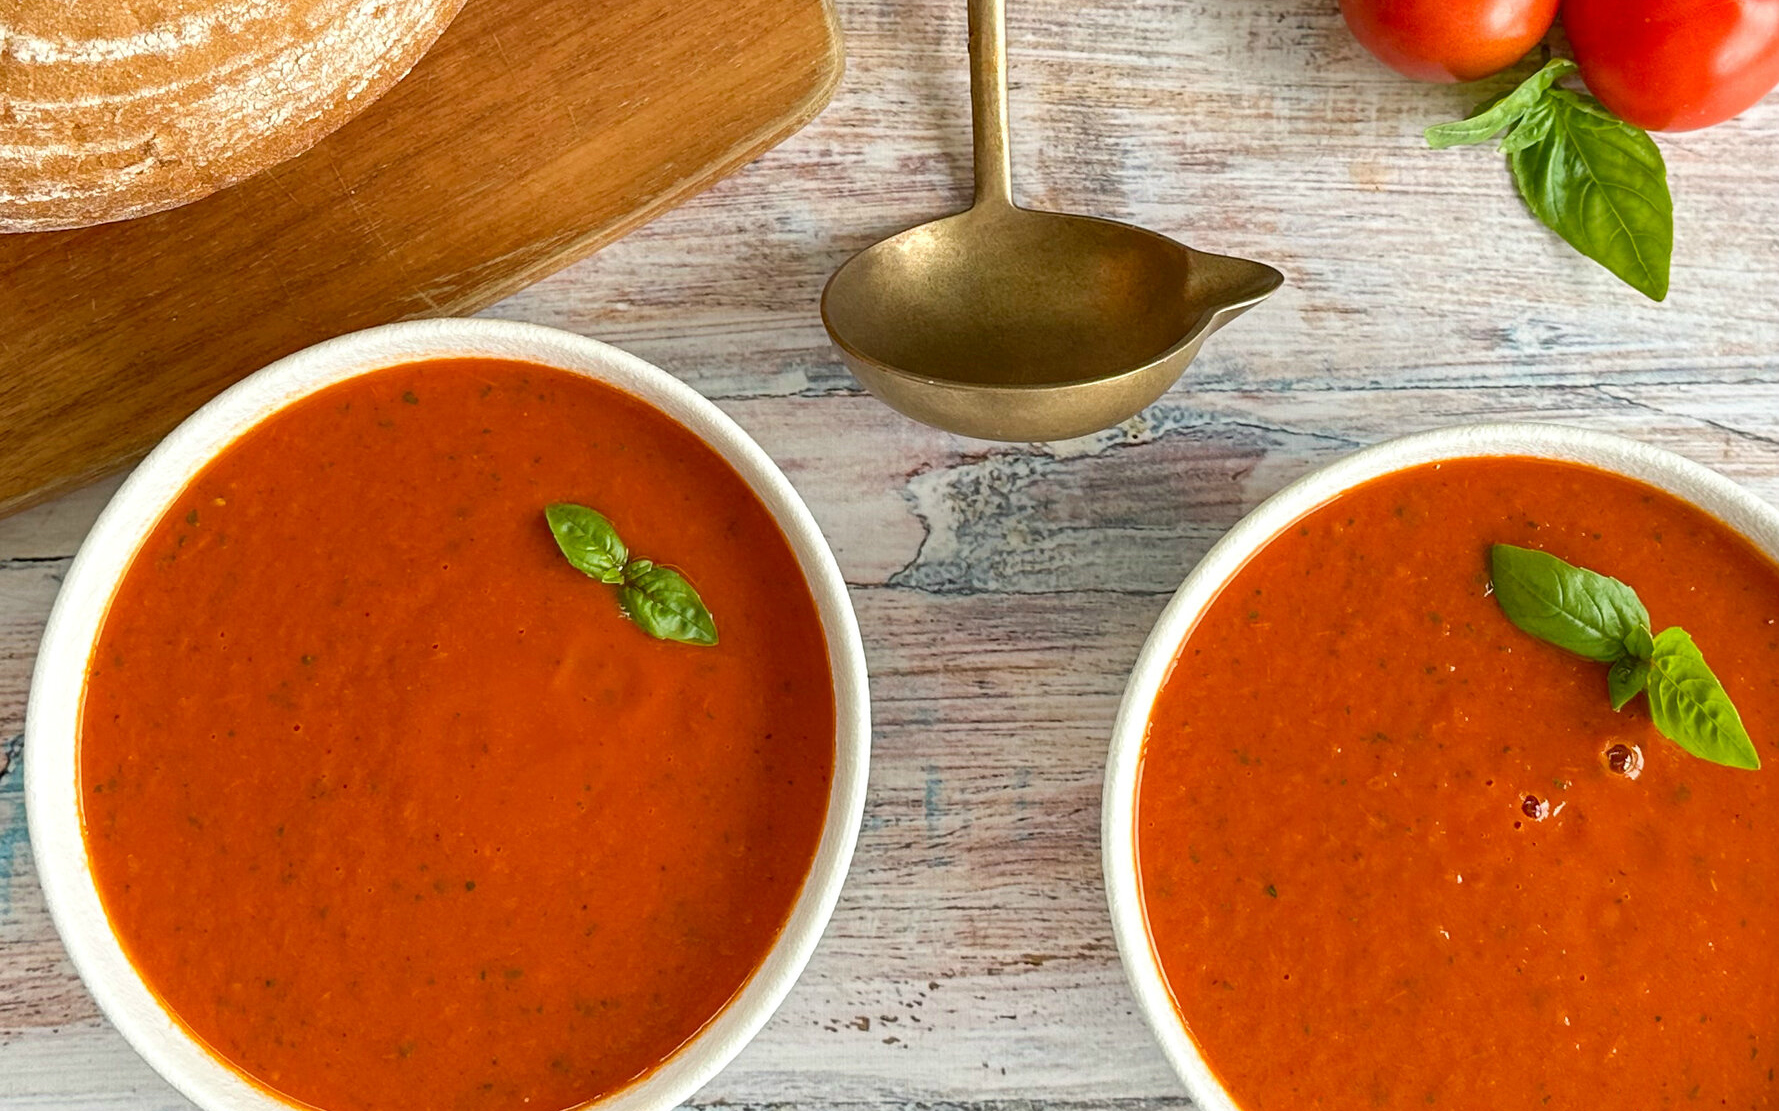 Slow Cooker Roasted Tomato and Basil Soup - Just Slow Cooker Recipes